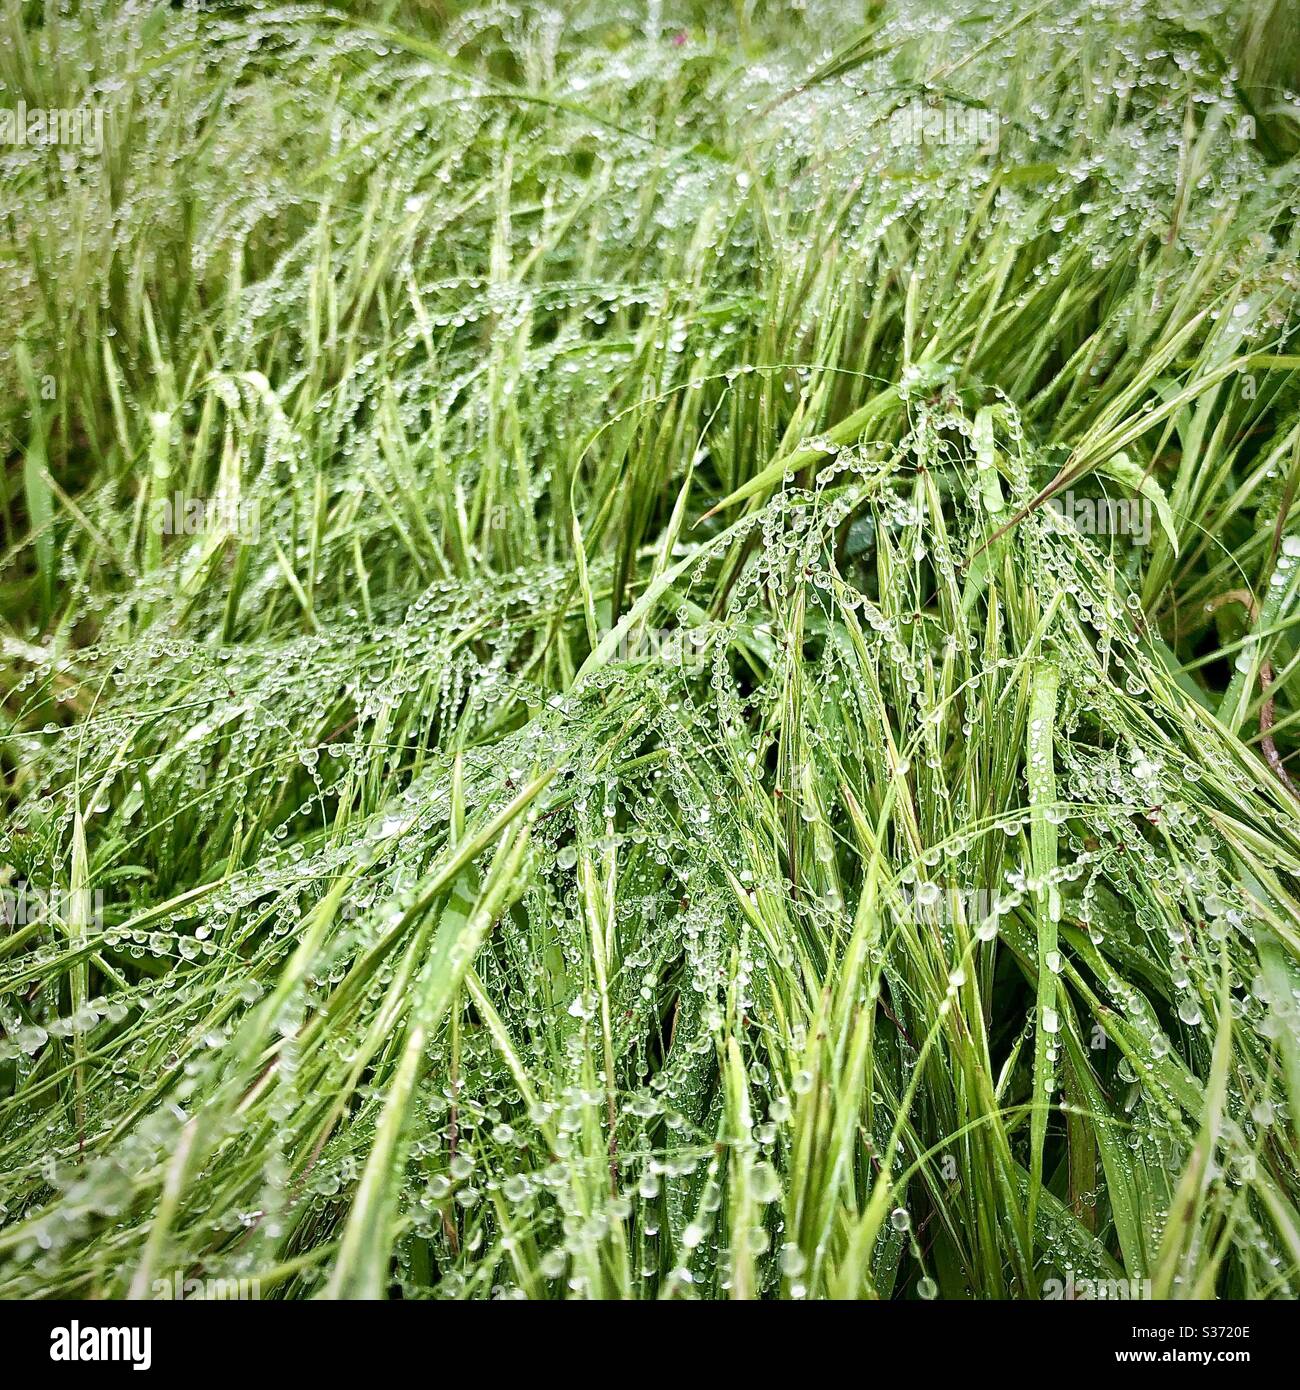 Droplets of rain on long grass. Stock Photo